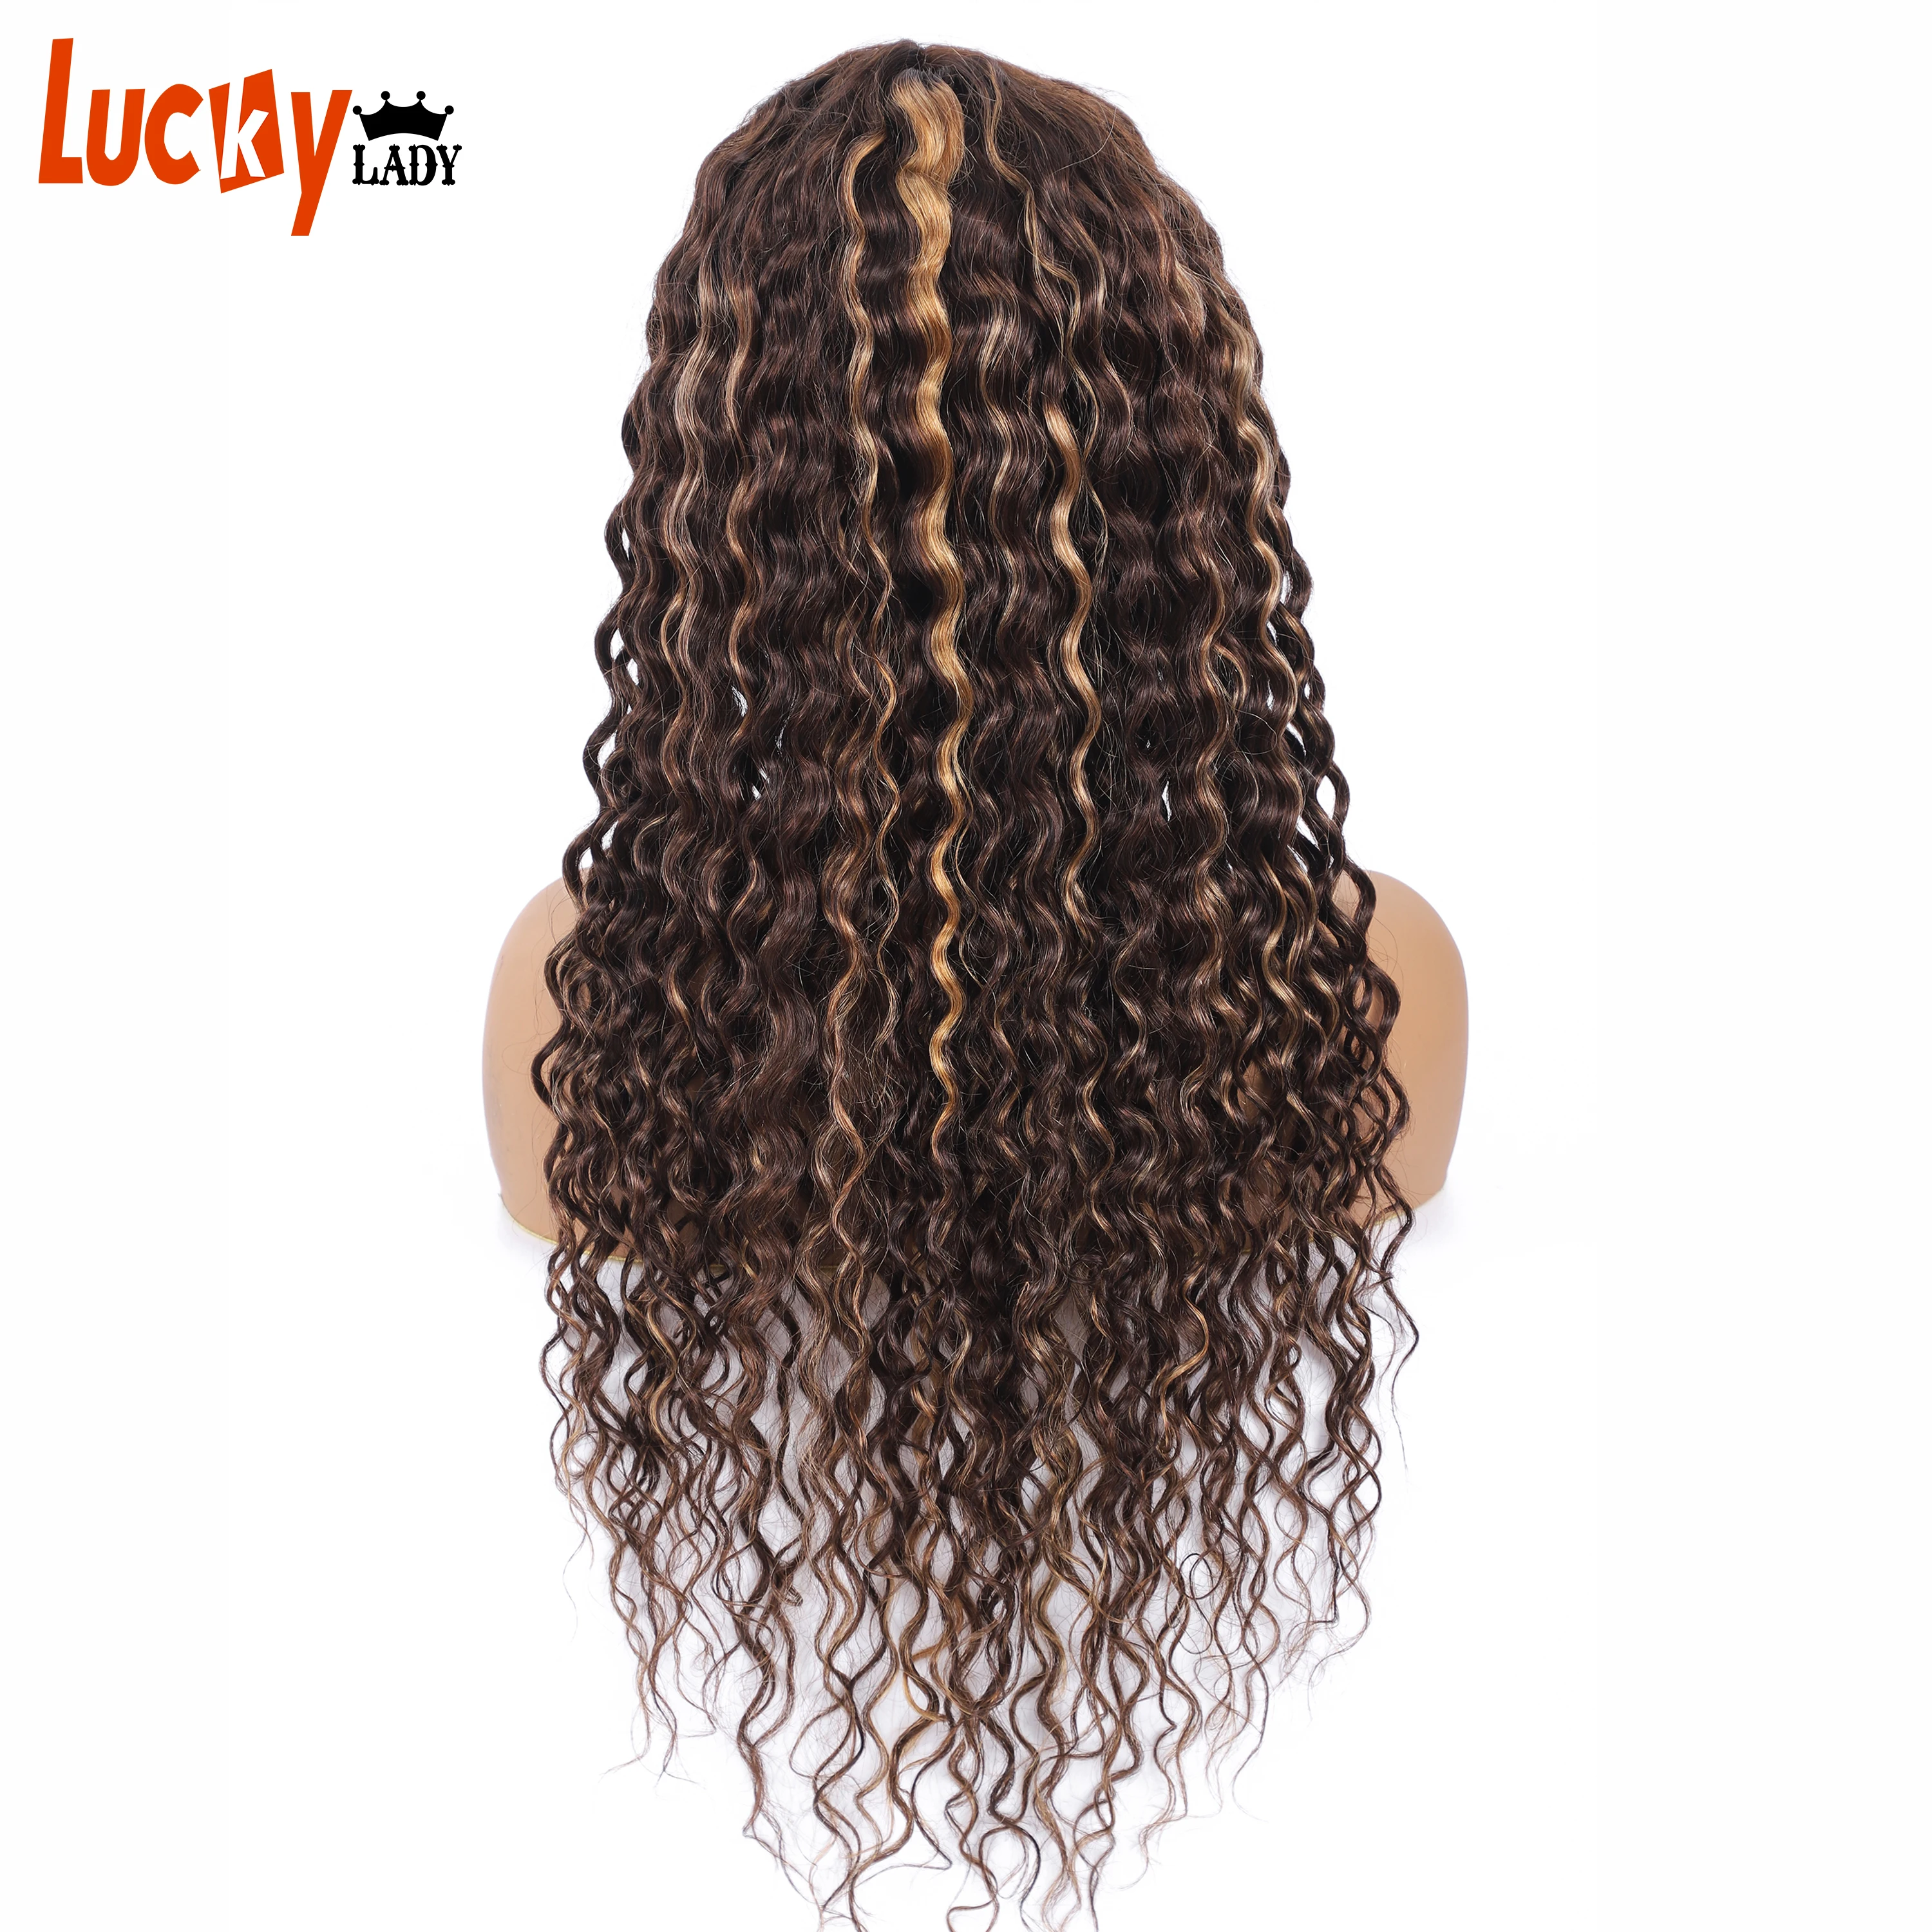 

Human Hair Wigs P4/27 Honey Blond Color Hd 13x4x1 Water Wave Lace Frontal Wig 180 Density Pre-Plucked Hair Wigs For Black Women